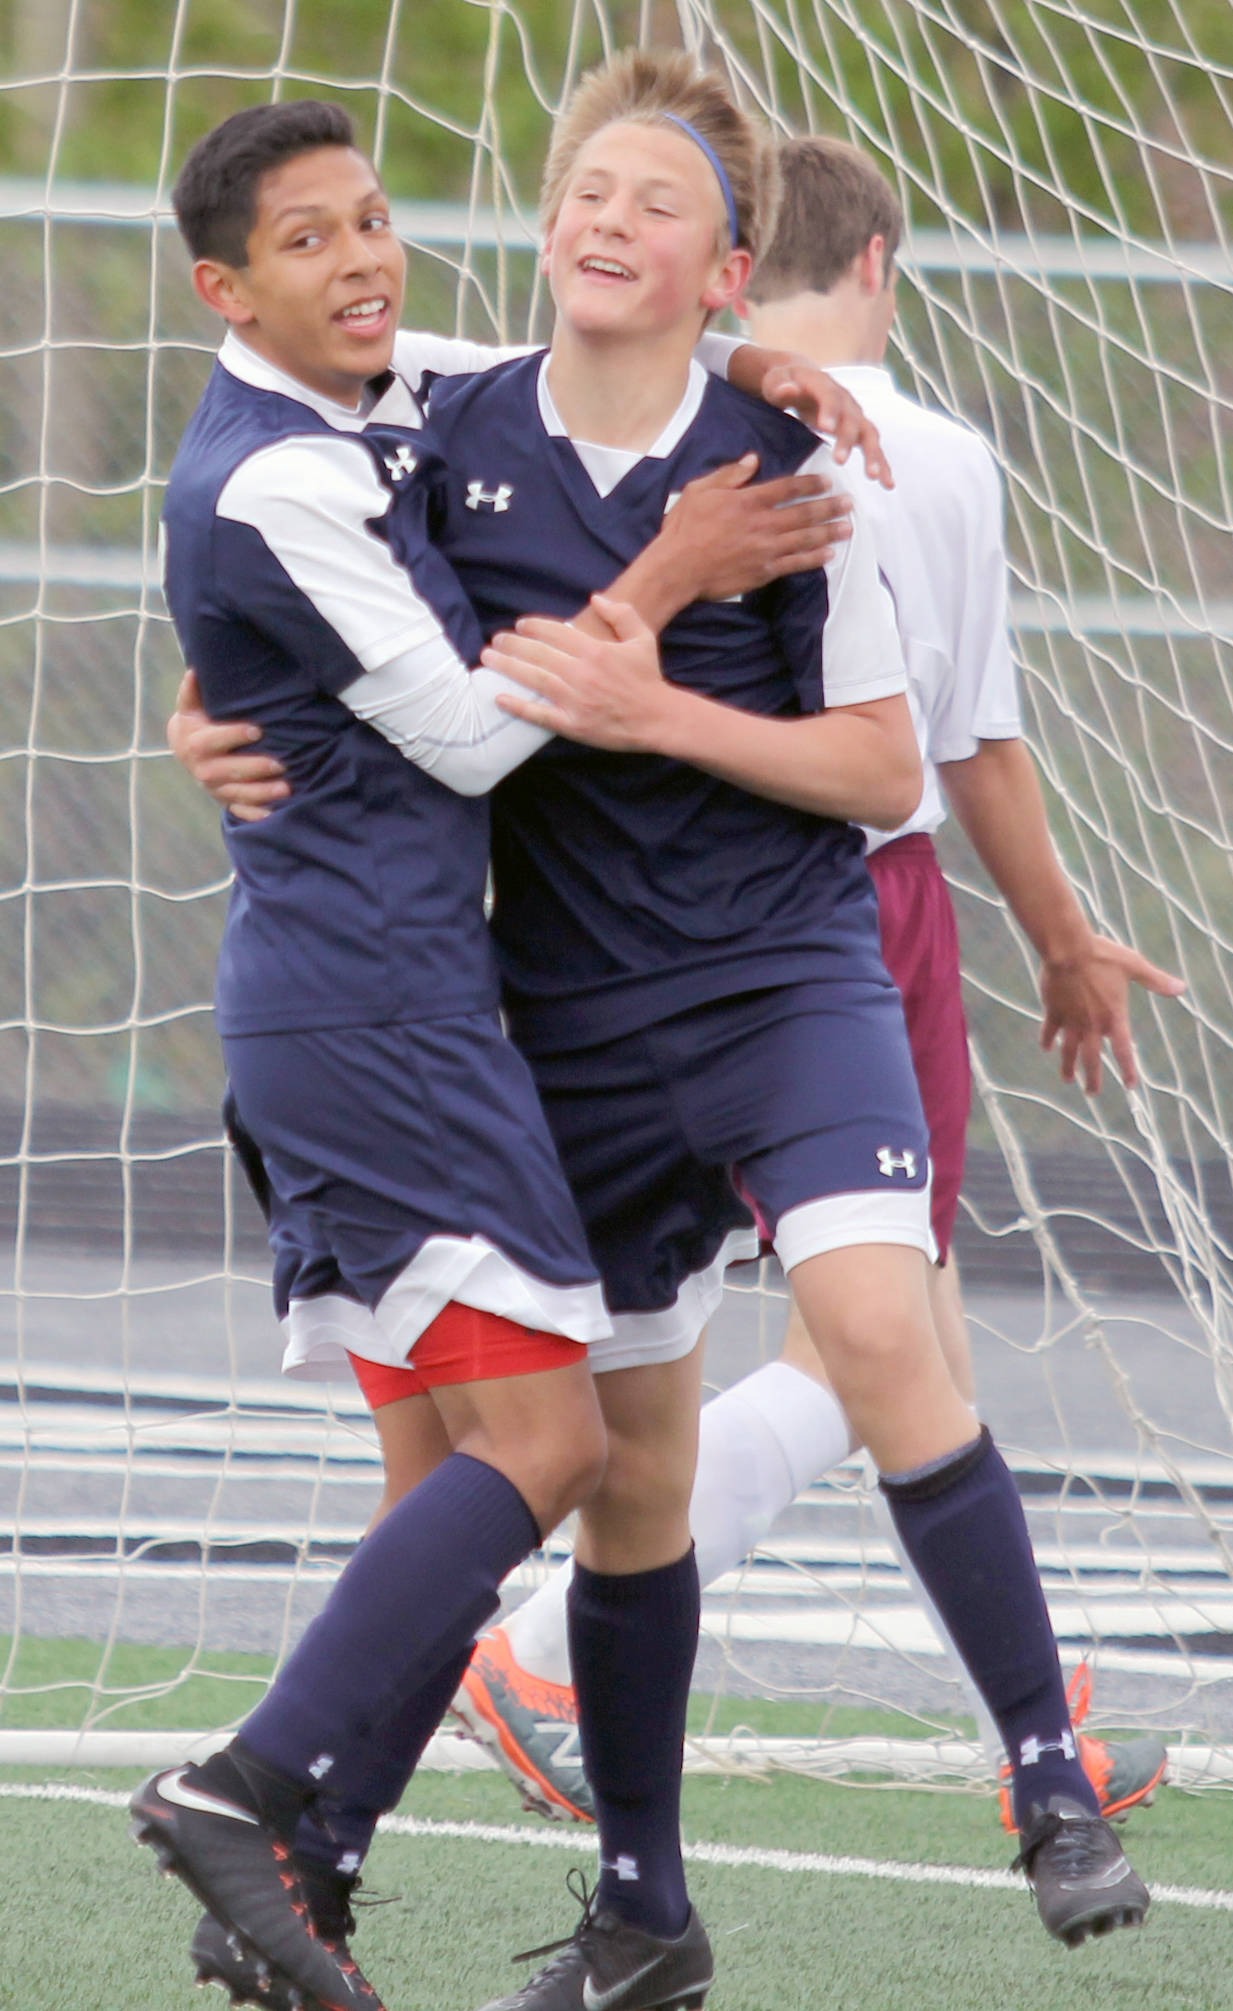 Soldotna’s Alex Montague and Brayden VanMeter celebrate a goal during the Northern Lights Conference Championships quarterfinals Thursday, May 18, 2017, at Colony High. (Photo by Jeremiah Bartz/Frontiersman.com)